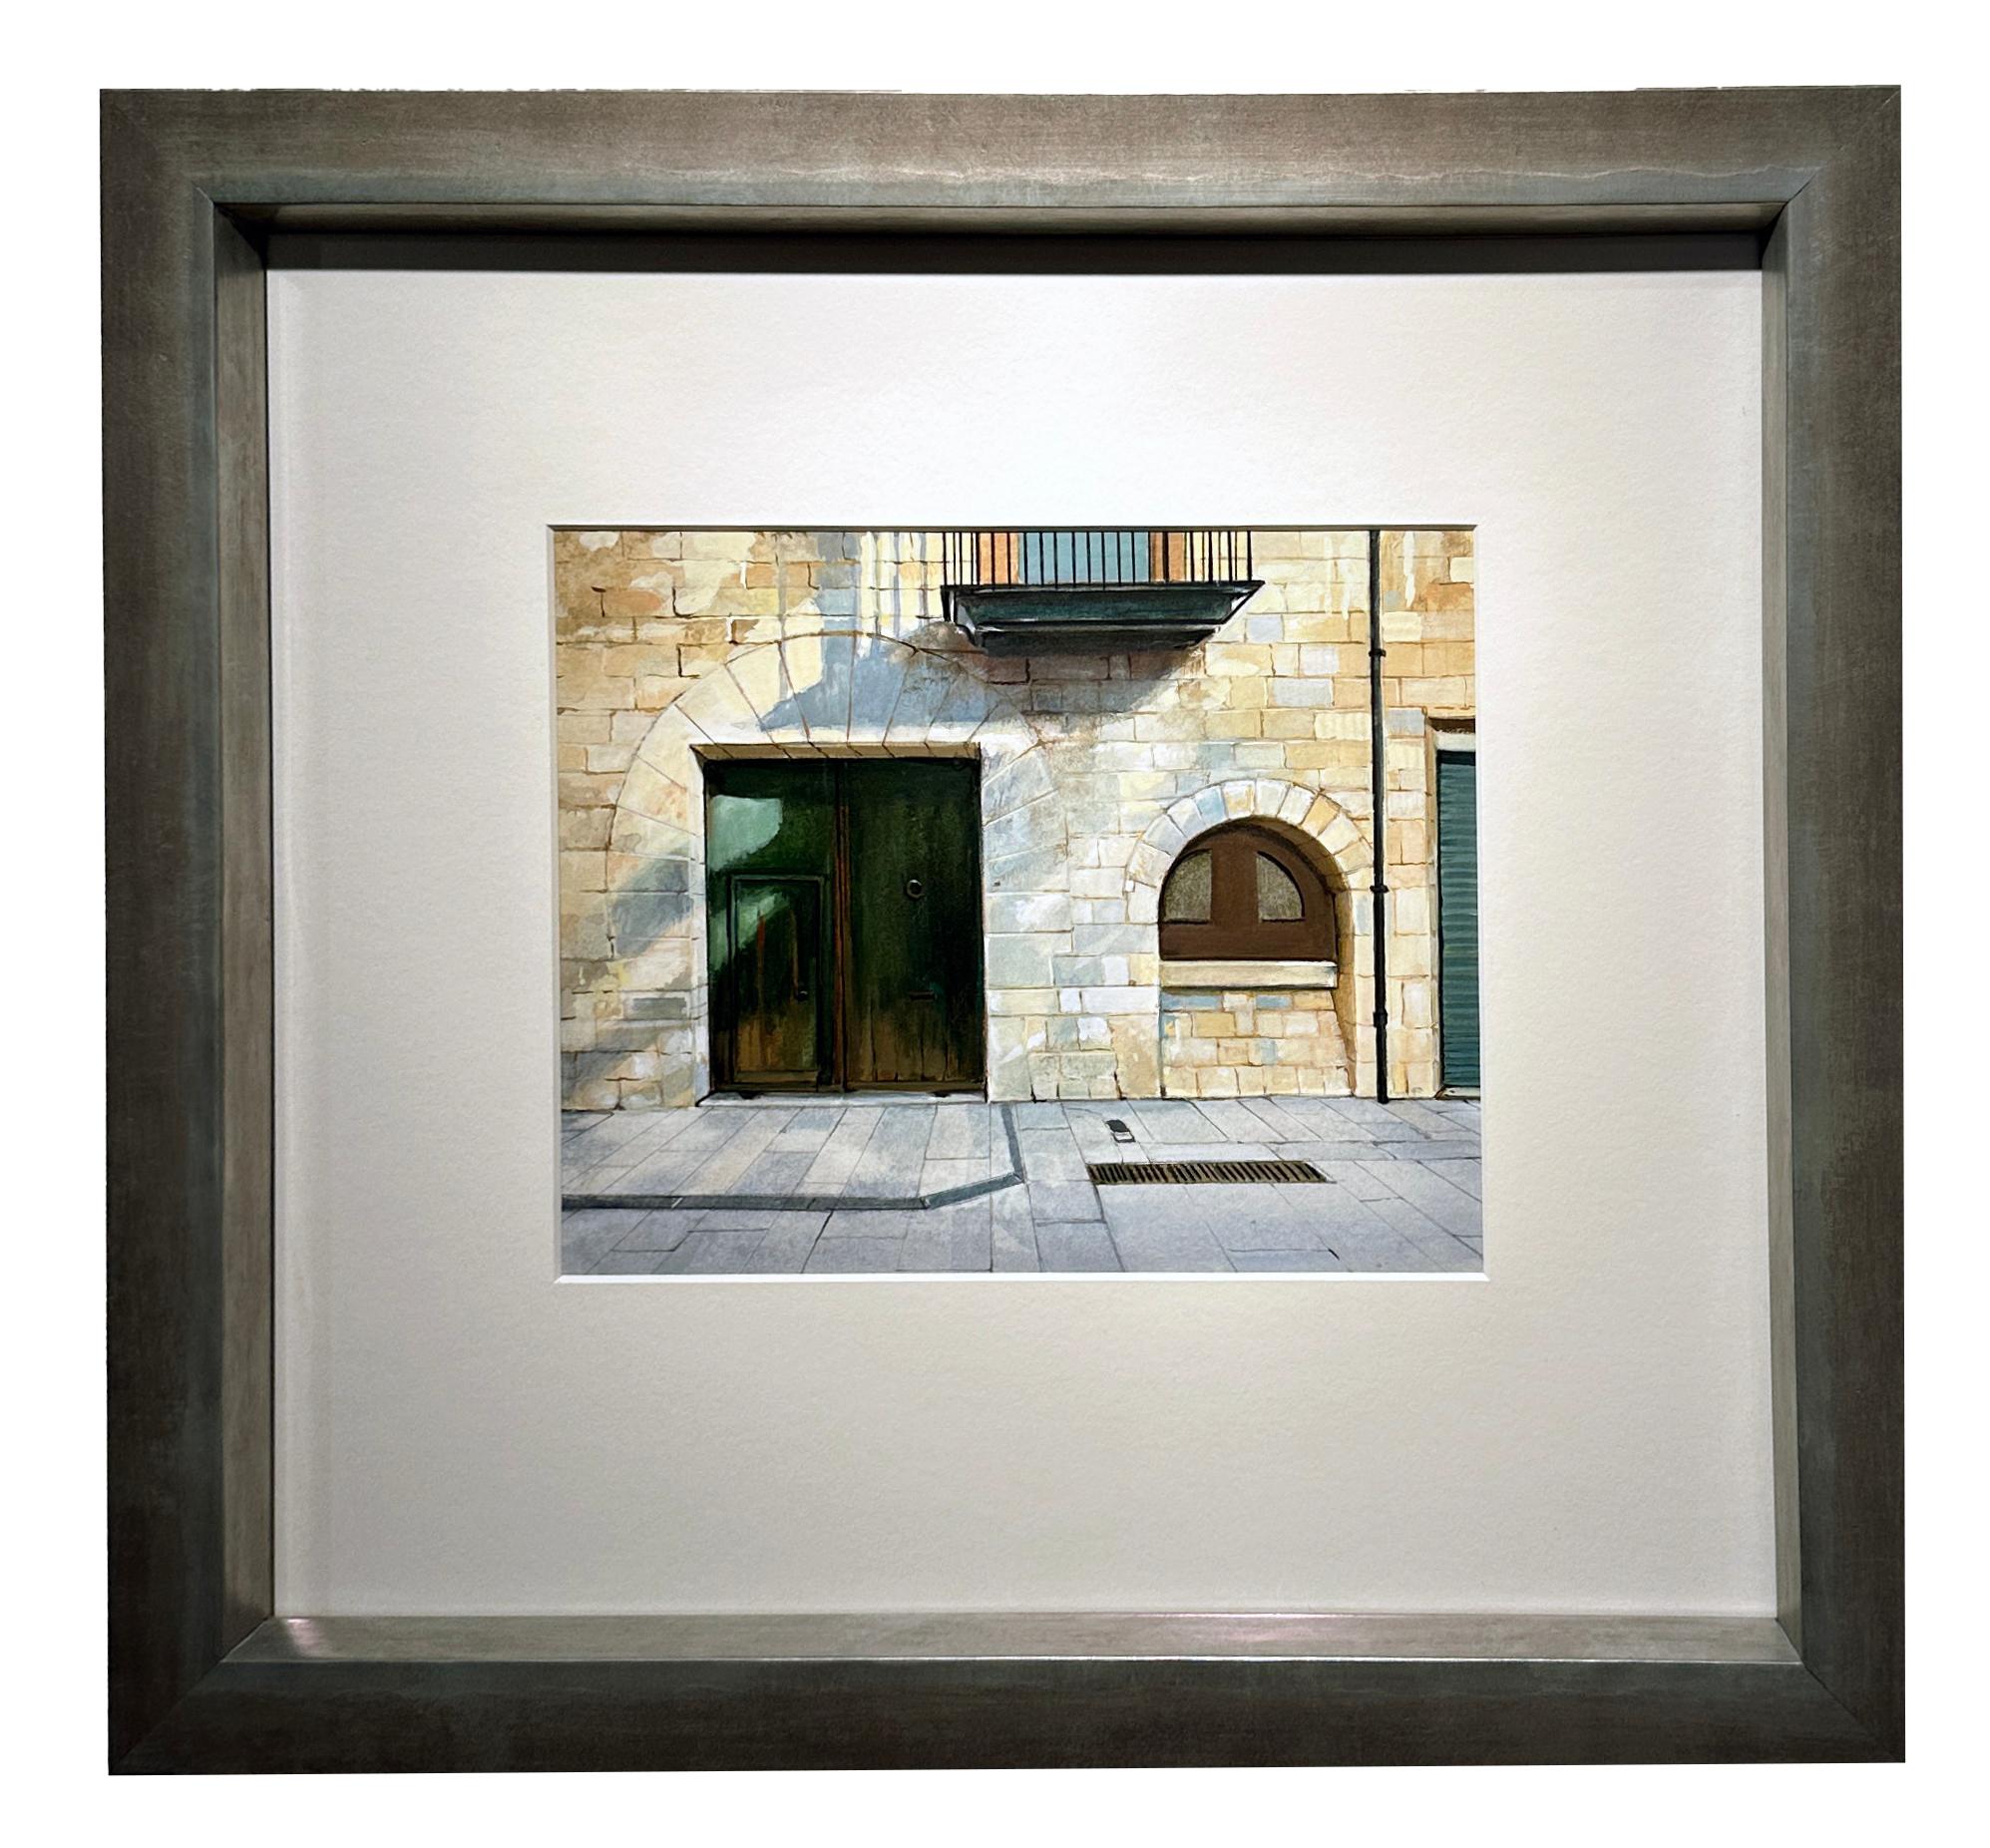 Aquardar (Waiting Expectantly) - Architectural Imagery, Doorways, Dappled Light For Sale 5